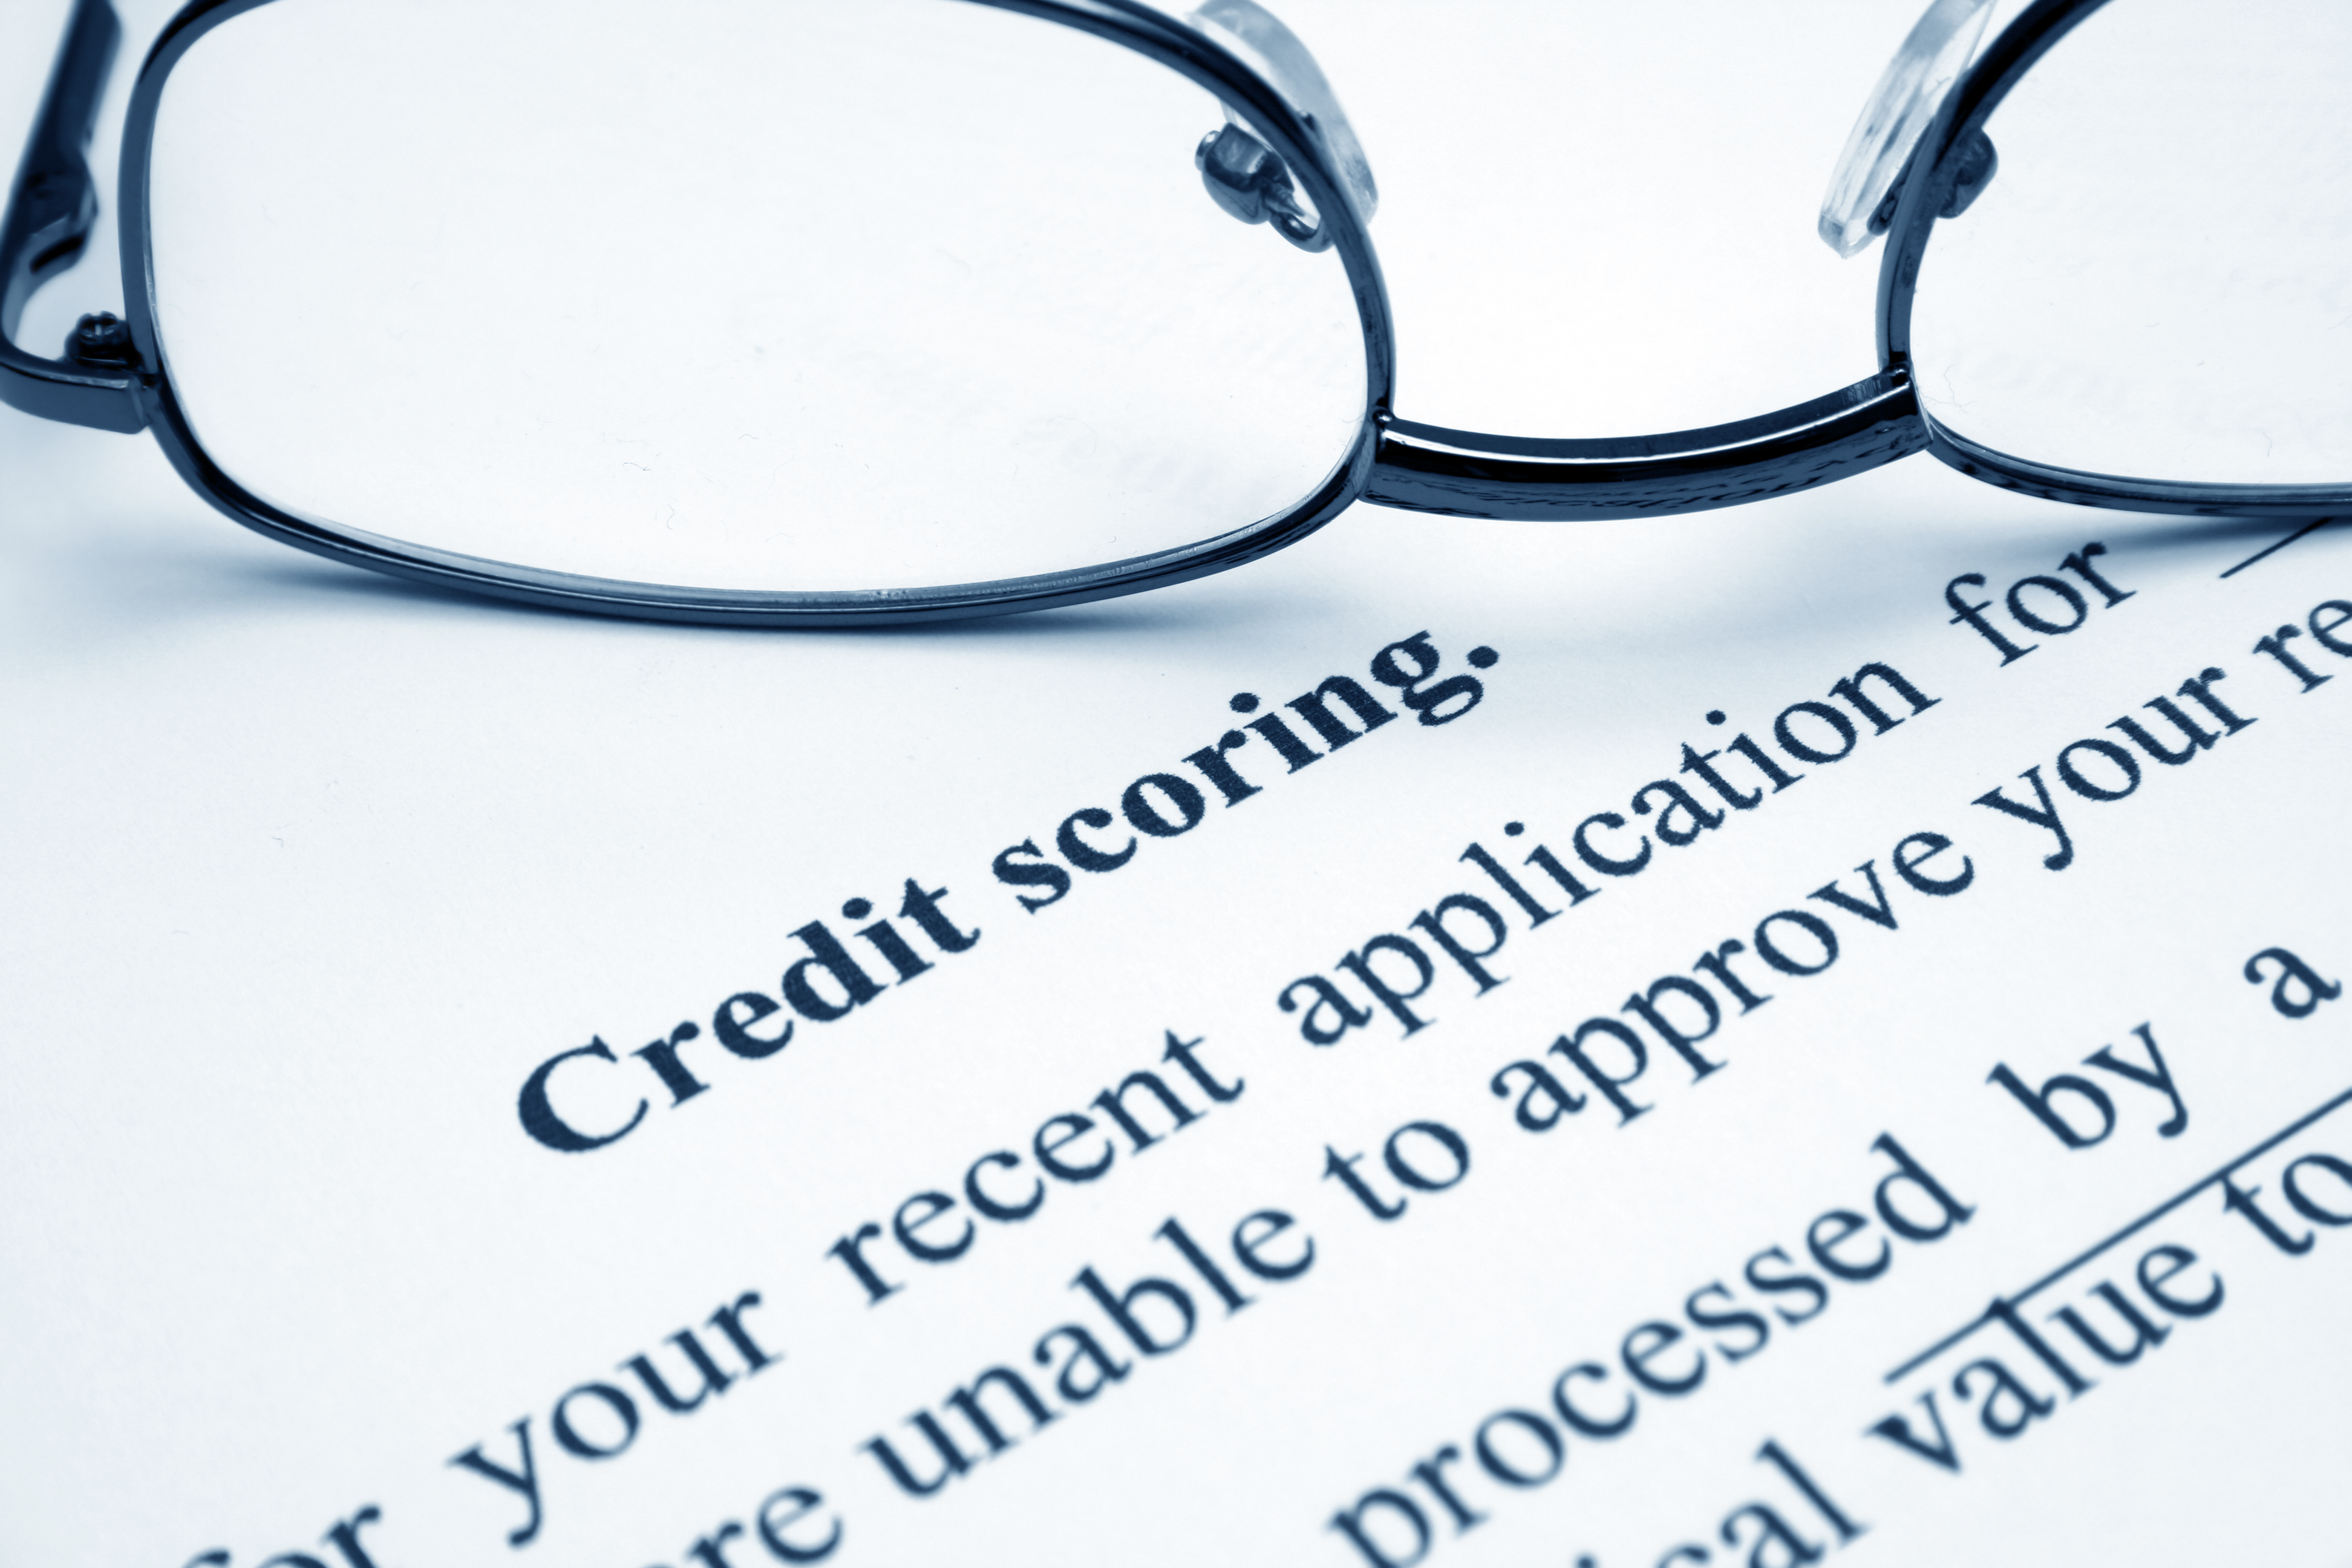 Can You Buy a House in Scottsdale With Bad Credit